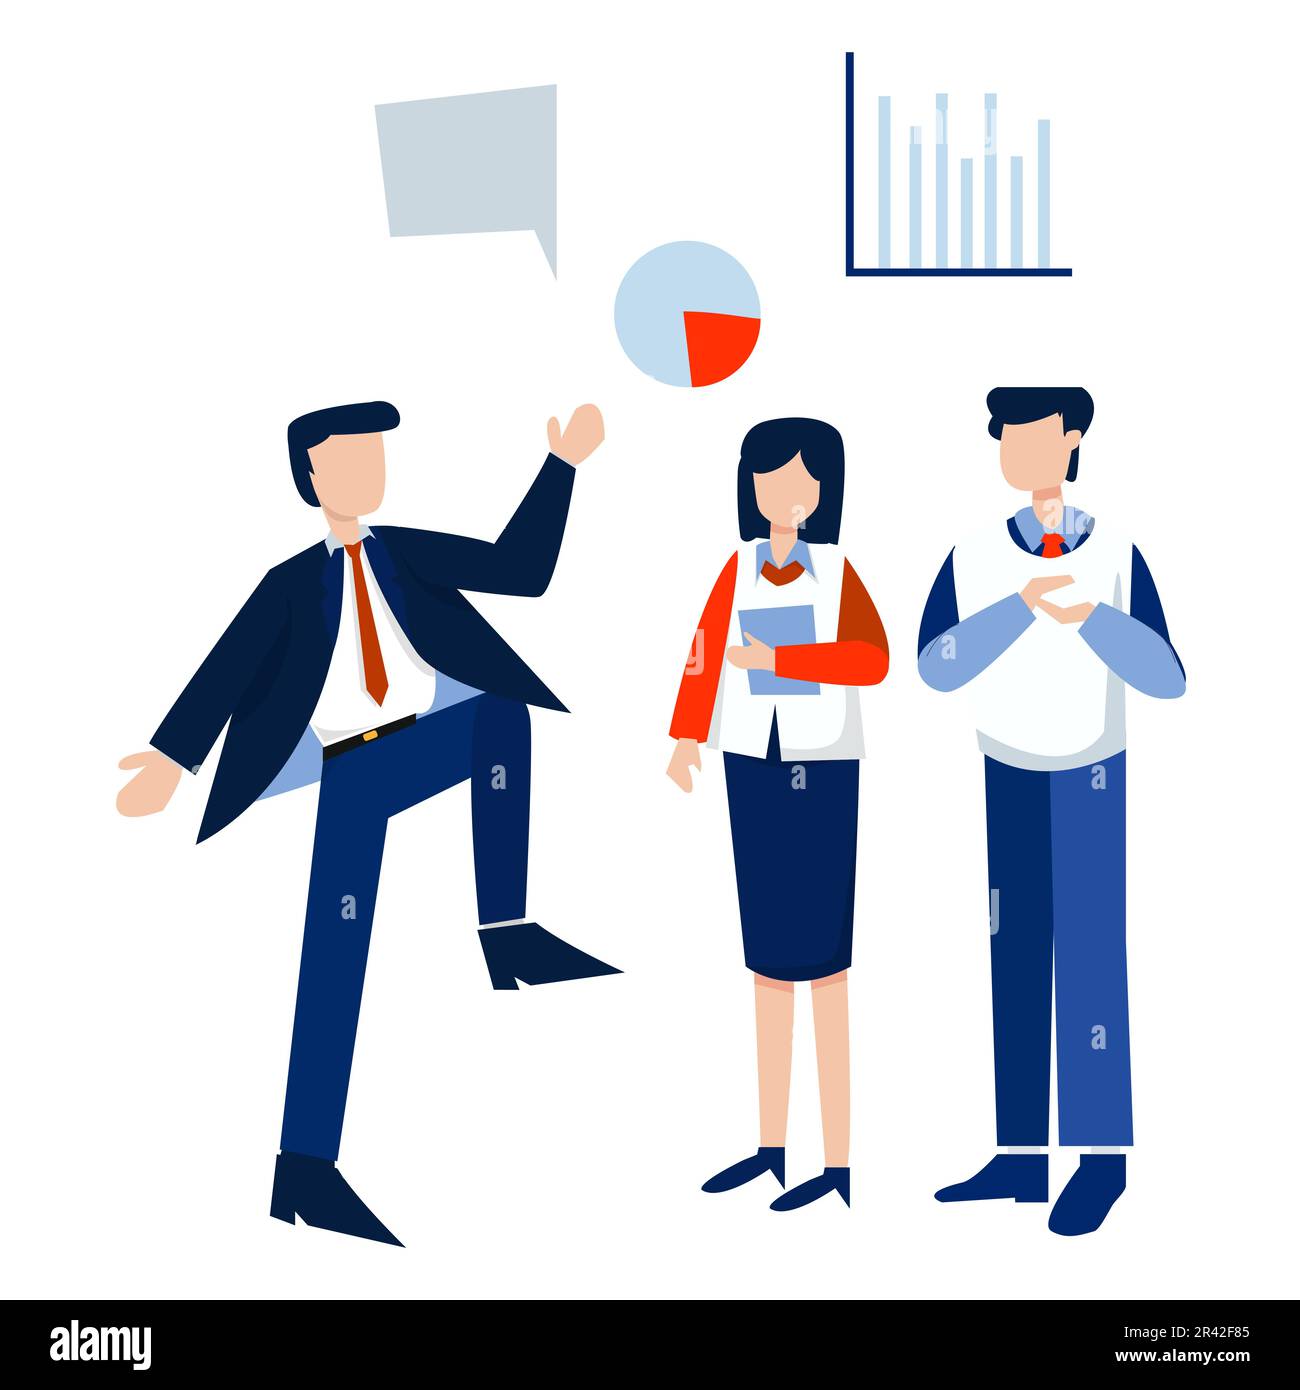 Business people teamwork vector illustration. Businessman and businesswoman cartoon characters. Stock Vector